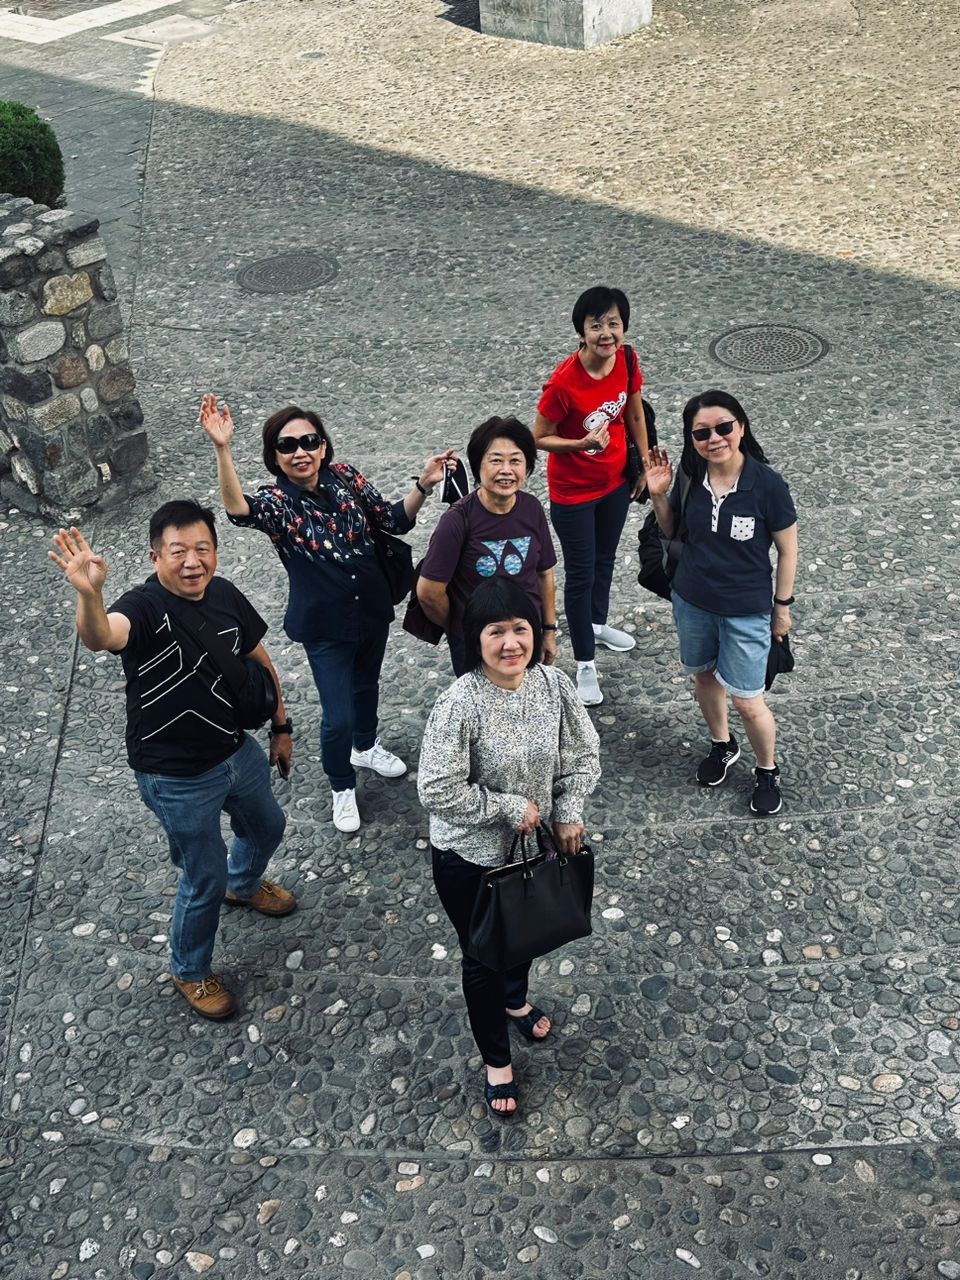 Tourists from Malaysia visiting the European continent